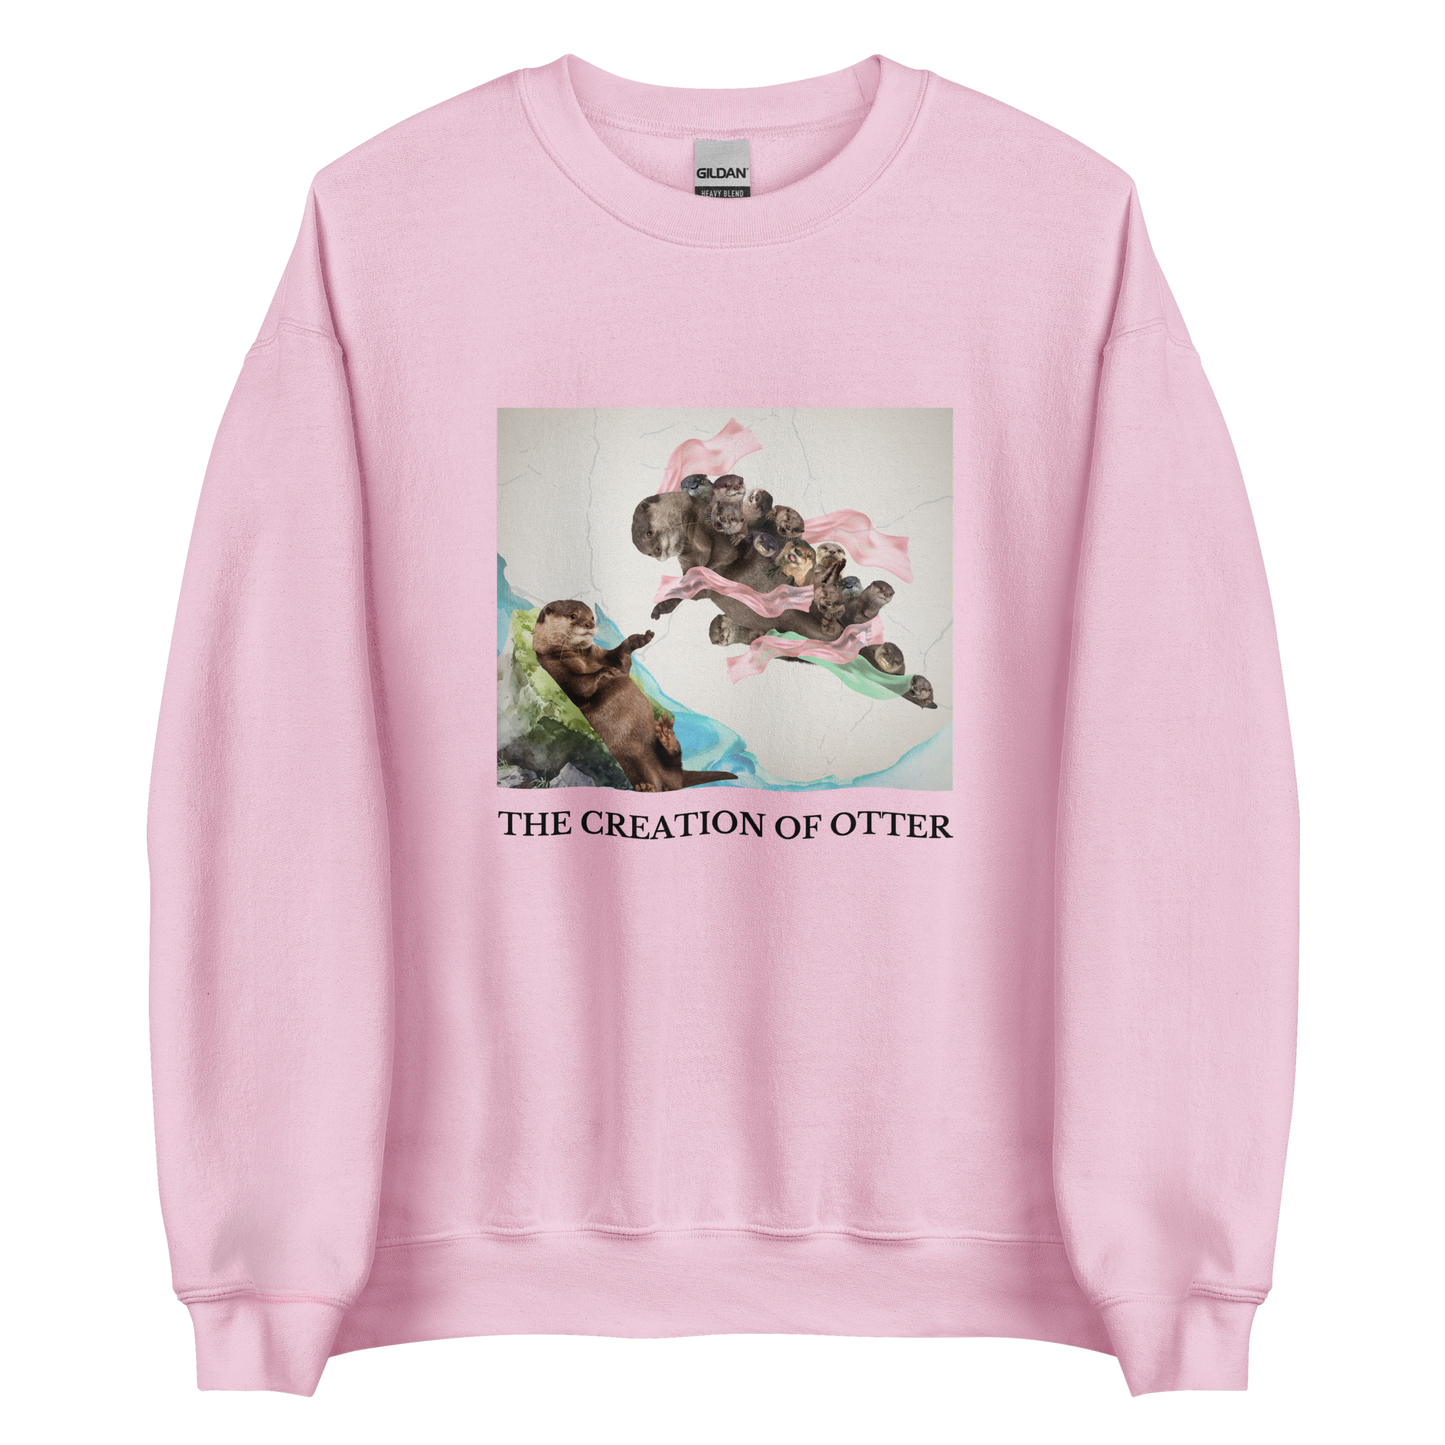 Light Pink Otter Sweatshirt featuring a playful The Creation of Otter parody of Michelangelo's masterpiece - Artsy/Funny Graphic Otter Sweatshirts - Boozy Fox